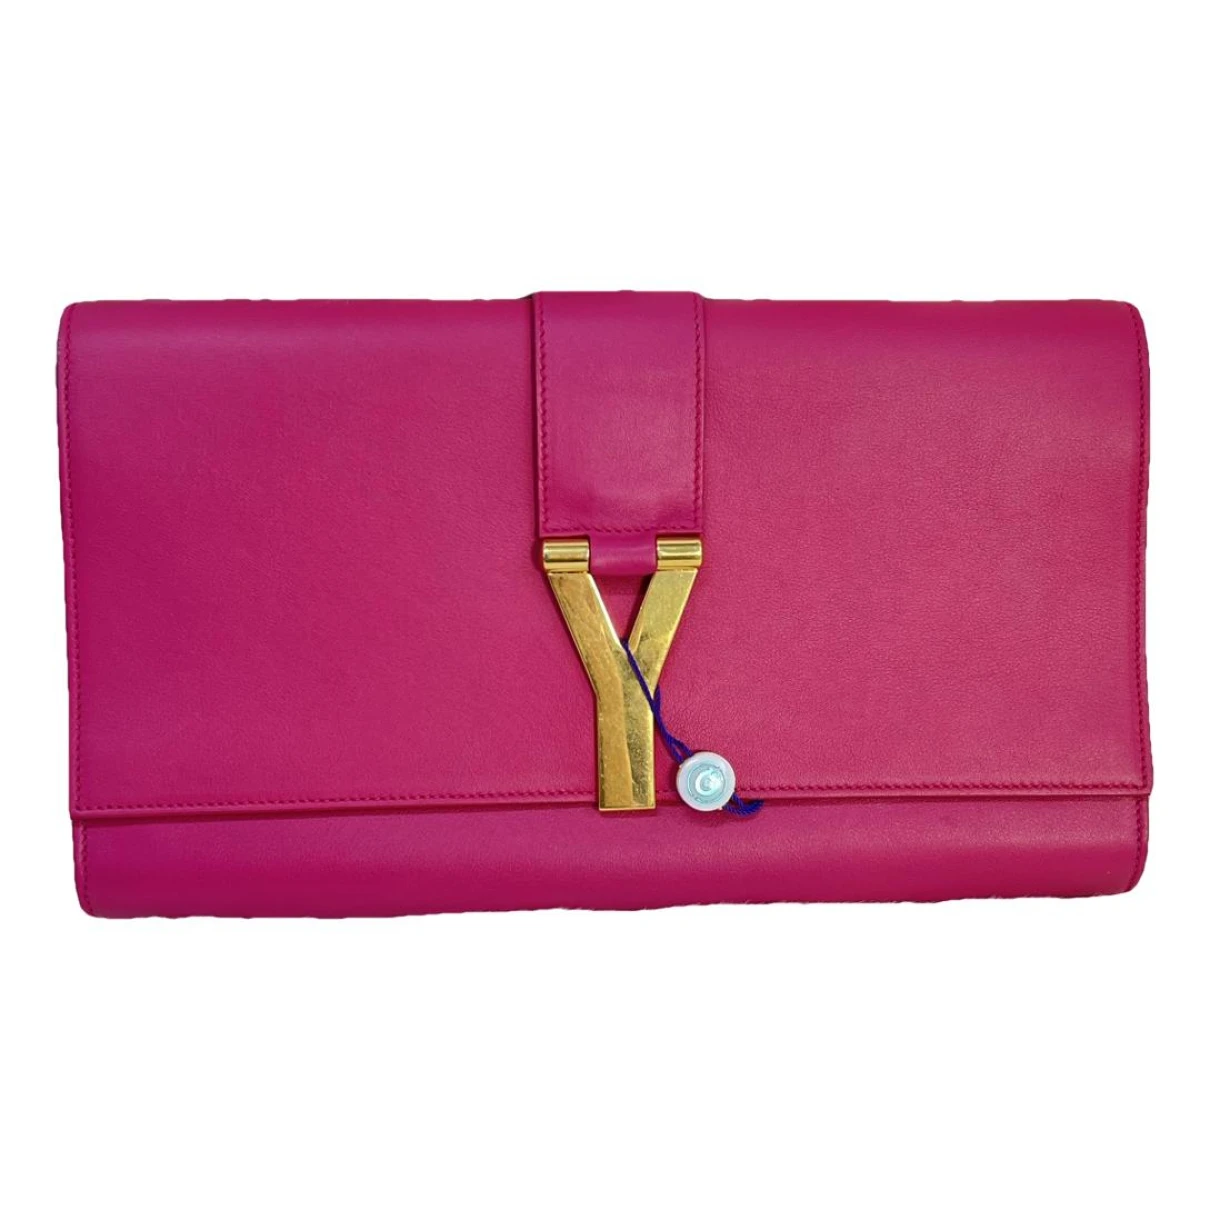 Pre-owned Saint Laurent Chyc Leather Clutch Bag In Pink